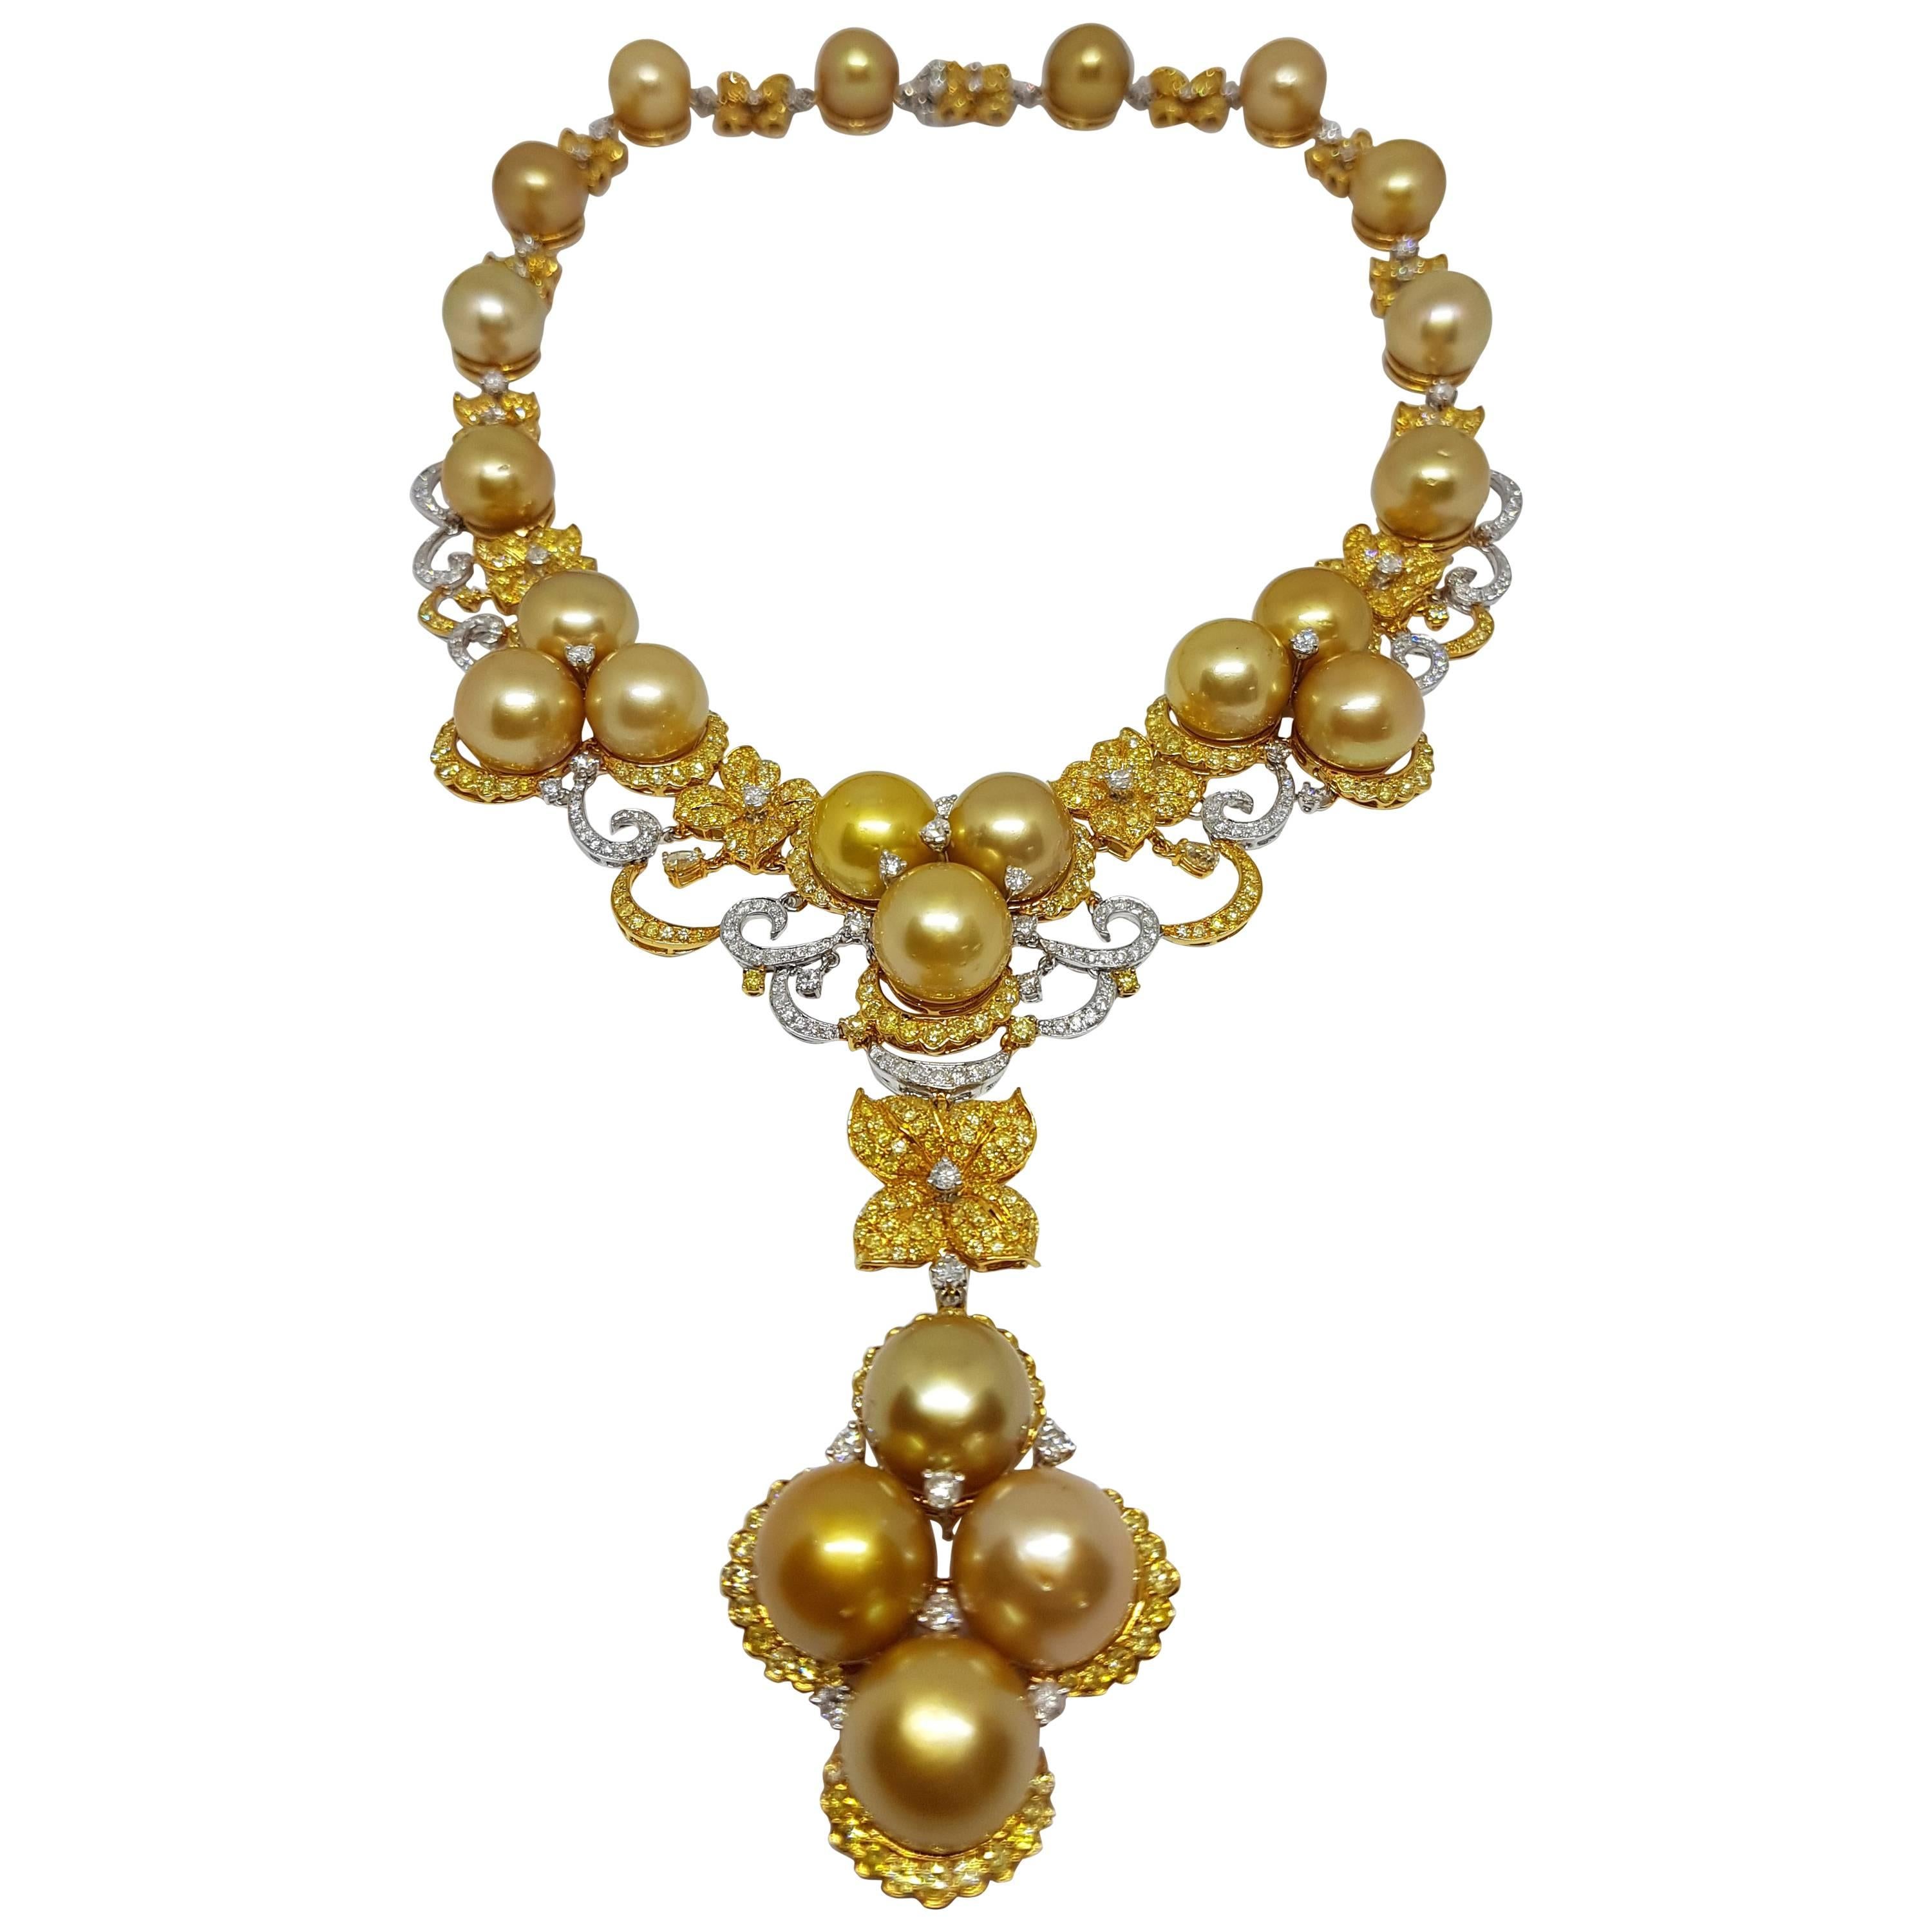 Golden South Sea Pearl Necklace with Diamonds and 18kt Gold 64.26 grams im Angebot